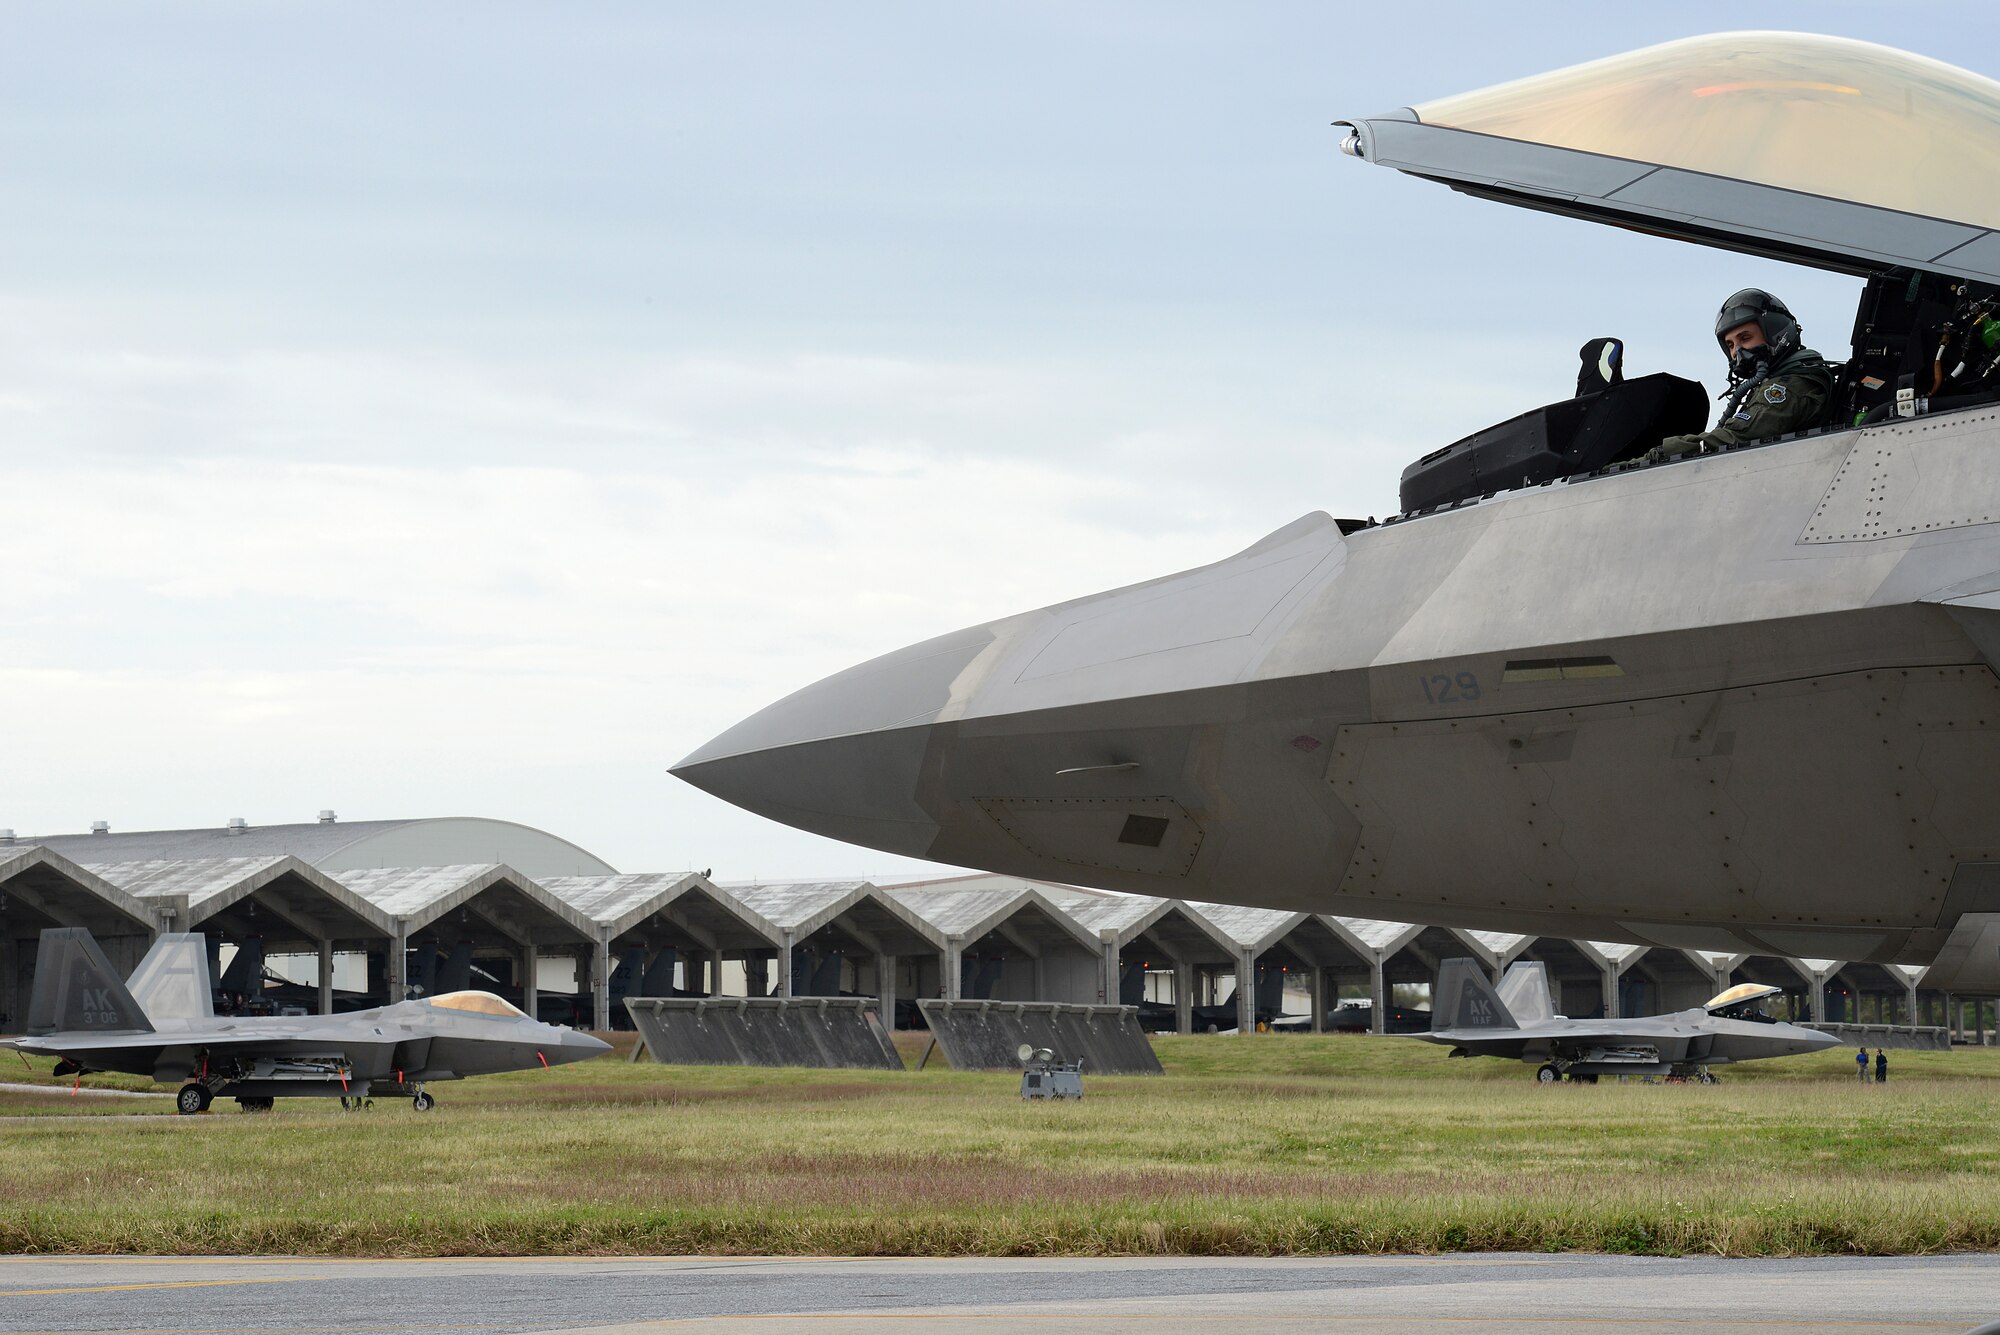 U.S. Air Force Capt. Nick Chachor, 525th Fighter Squadron weapons officer and F-22 Raptor pilot, prepares for takeoff during Keen Sword 2015 on Kadena Air Base, Japan, Nov. 14, 2014. The fundamental role of U.S. forces in Japan is to deter aggression and maintain peace and security in the region, and is an essential component of the U.S.-Japan alliance. (U.S. Air Force photo by Senior Airman Maeson L. Elleman/Released)